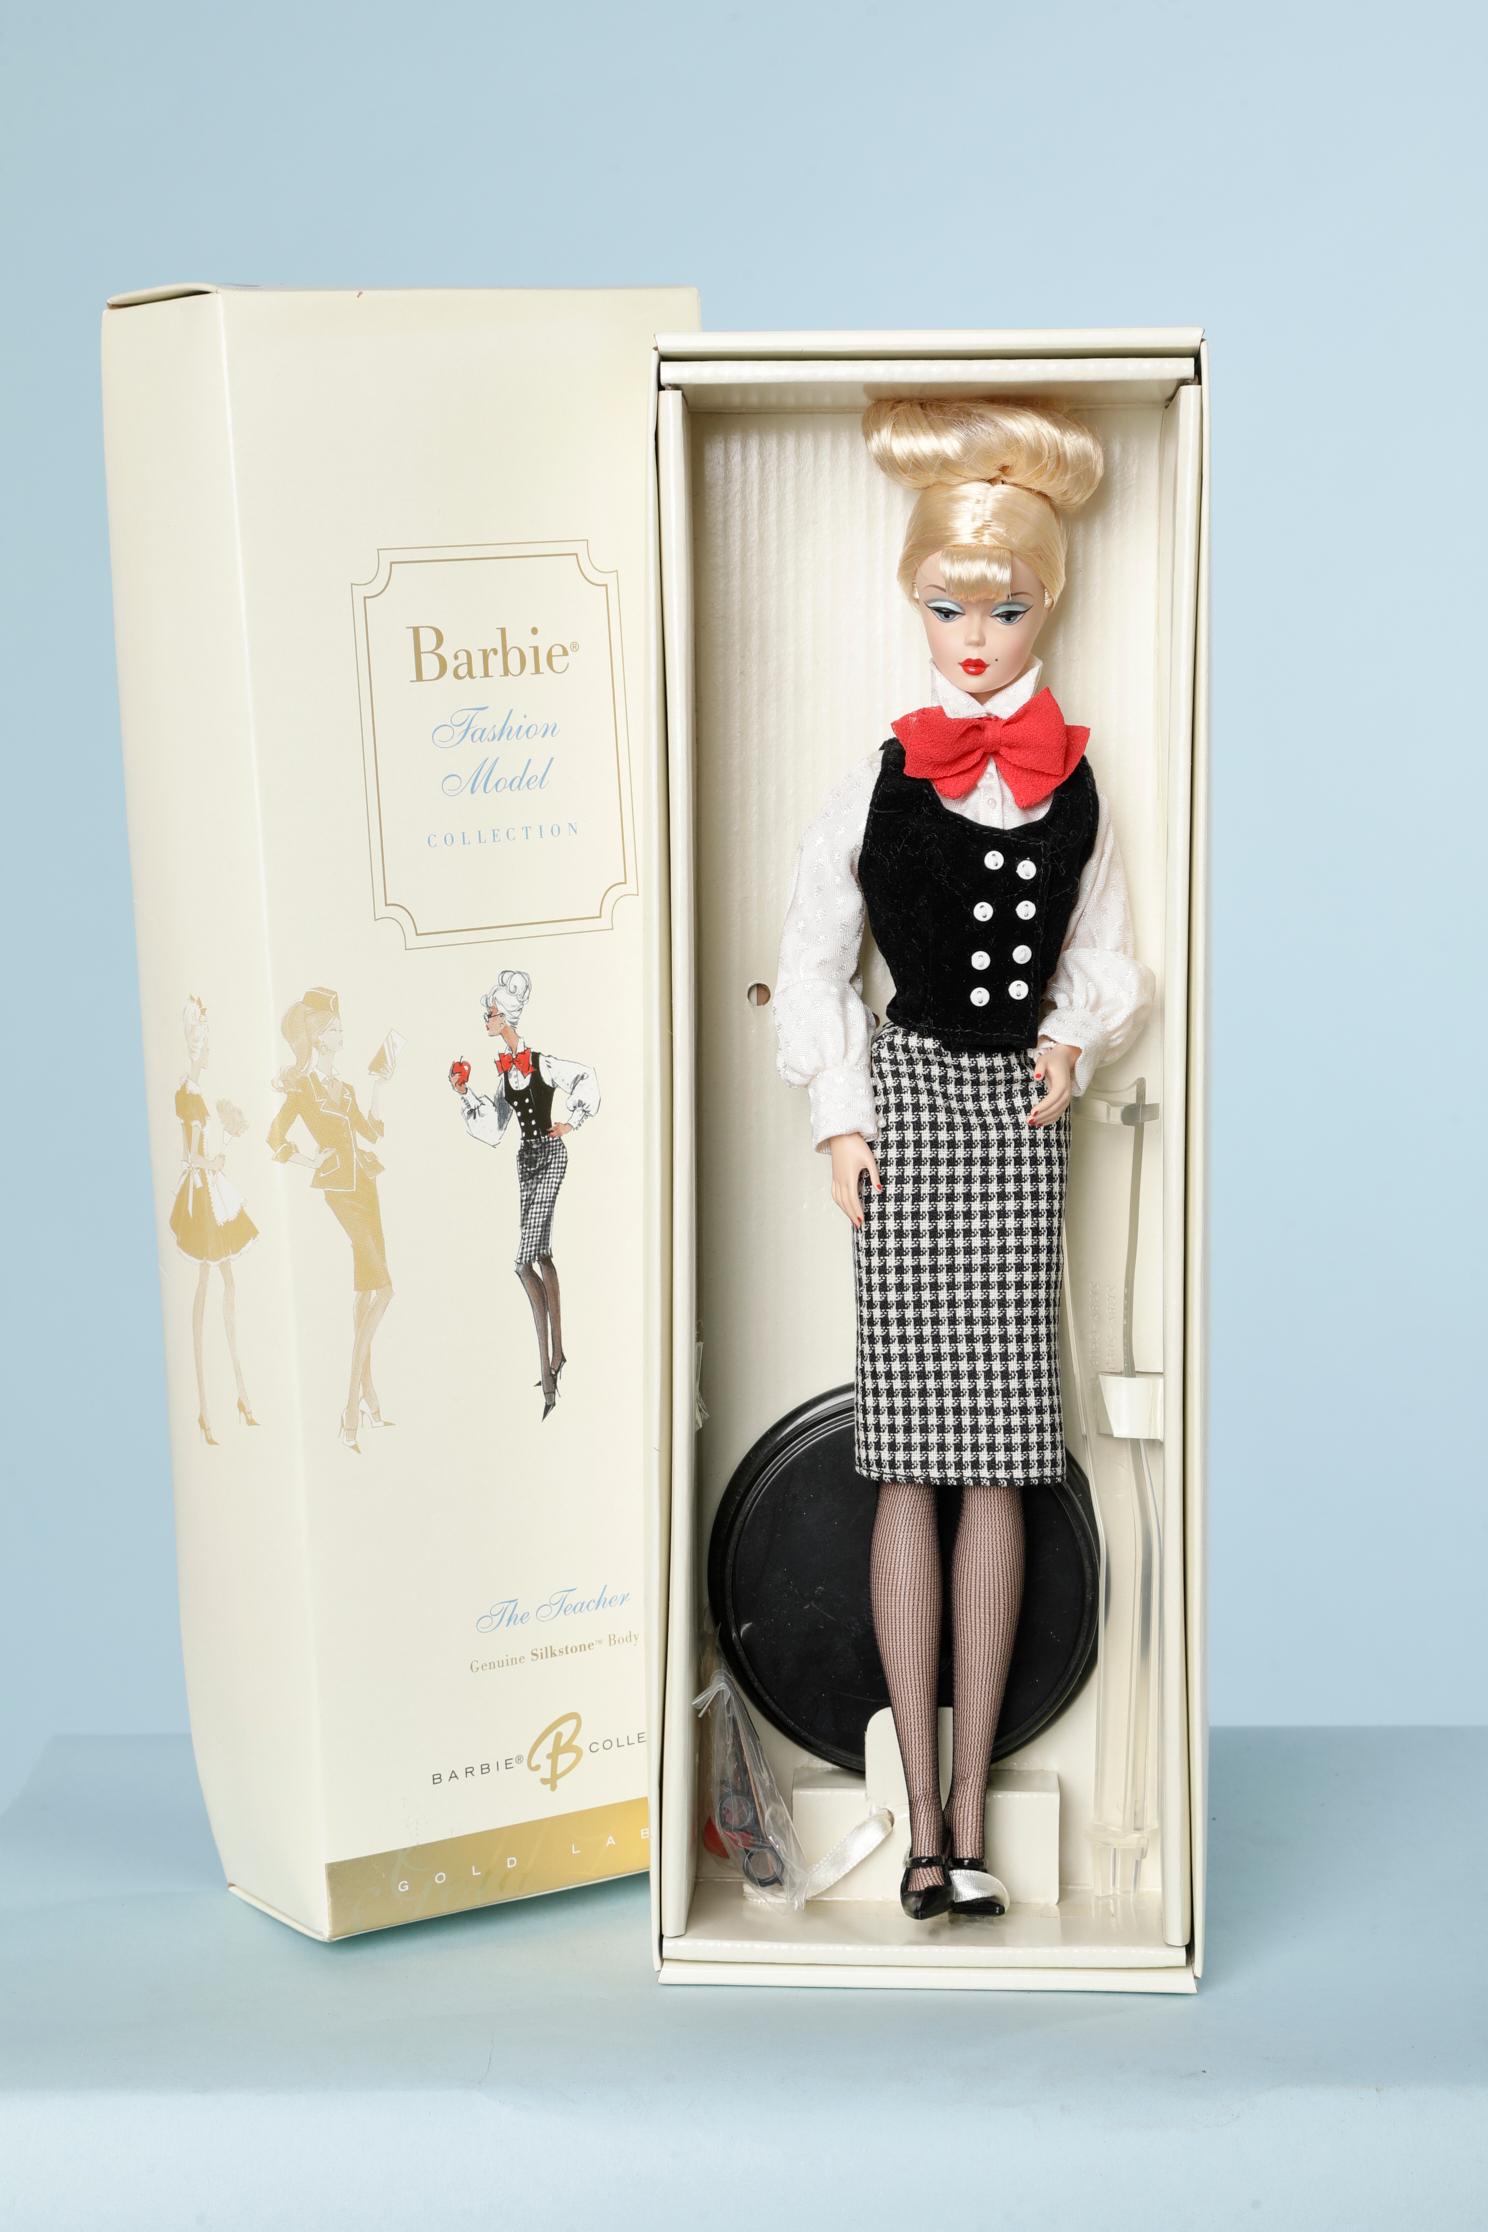 Barbie Fashion Model/ Gold Label / The Teacher.
Certificate of authenticity and Collector Card. 